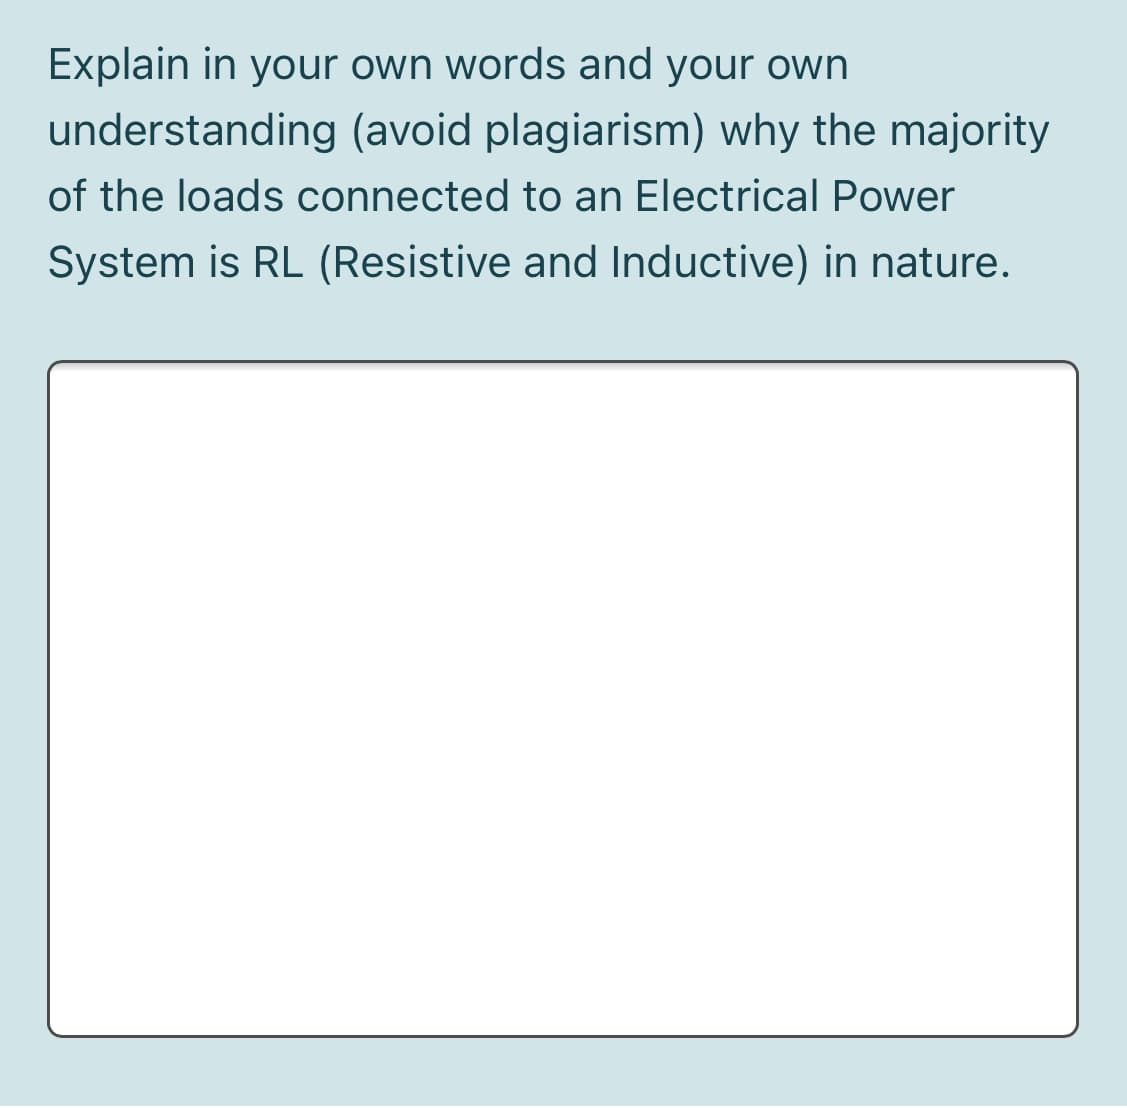 Explain in your own words and your own
understanding (avoid plagiarism) why the majority
of the loads connected to an Electrical Power
System is RL (Resistive and Inductive) in nature.
